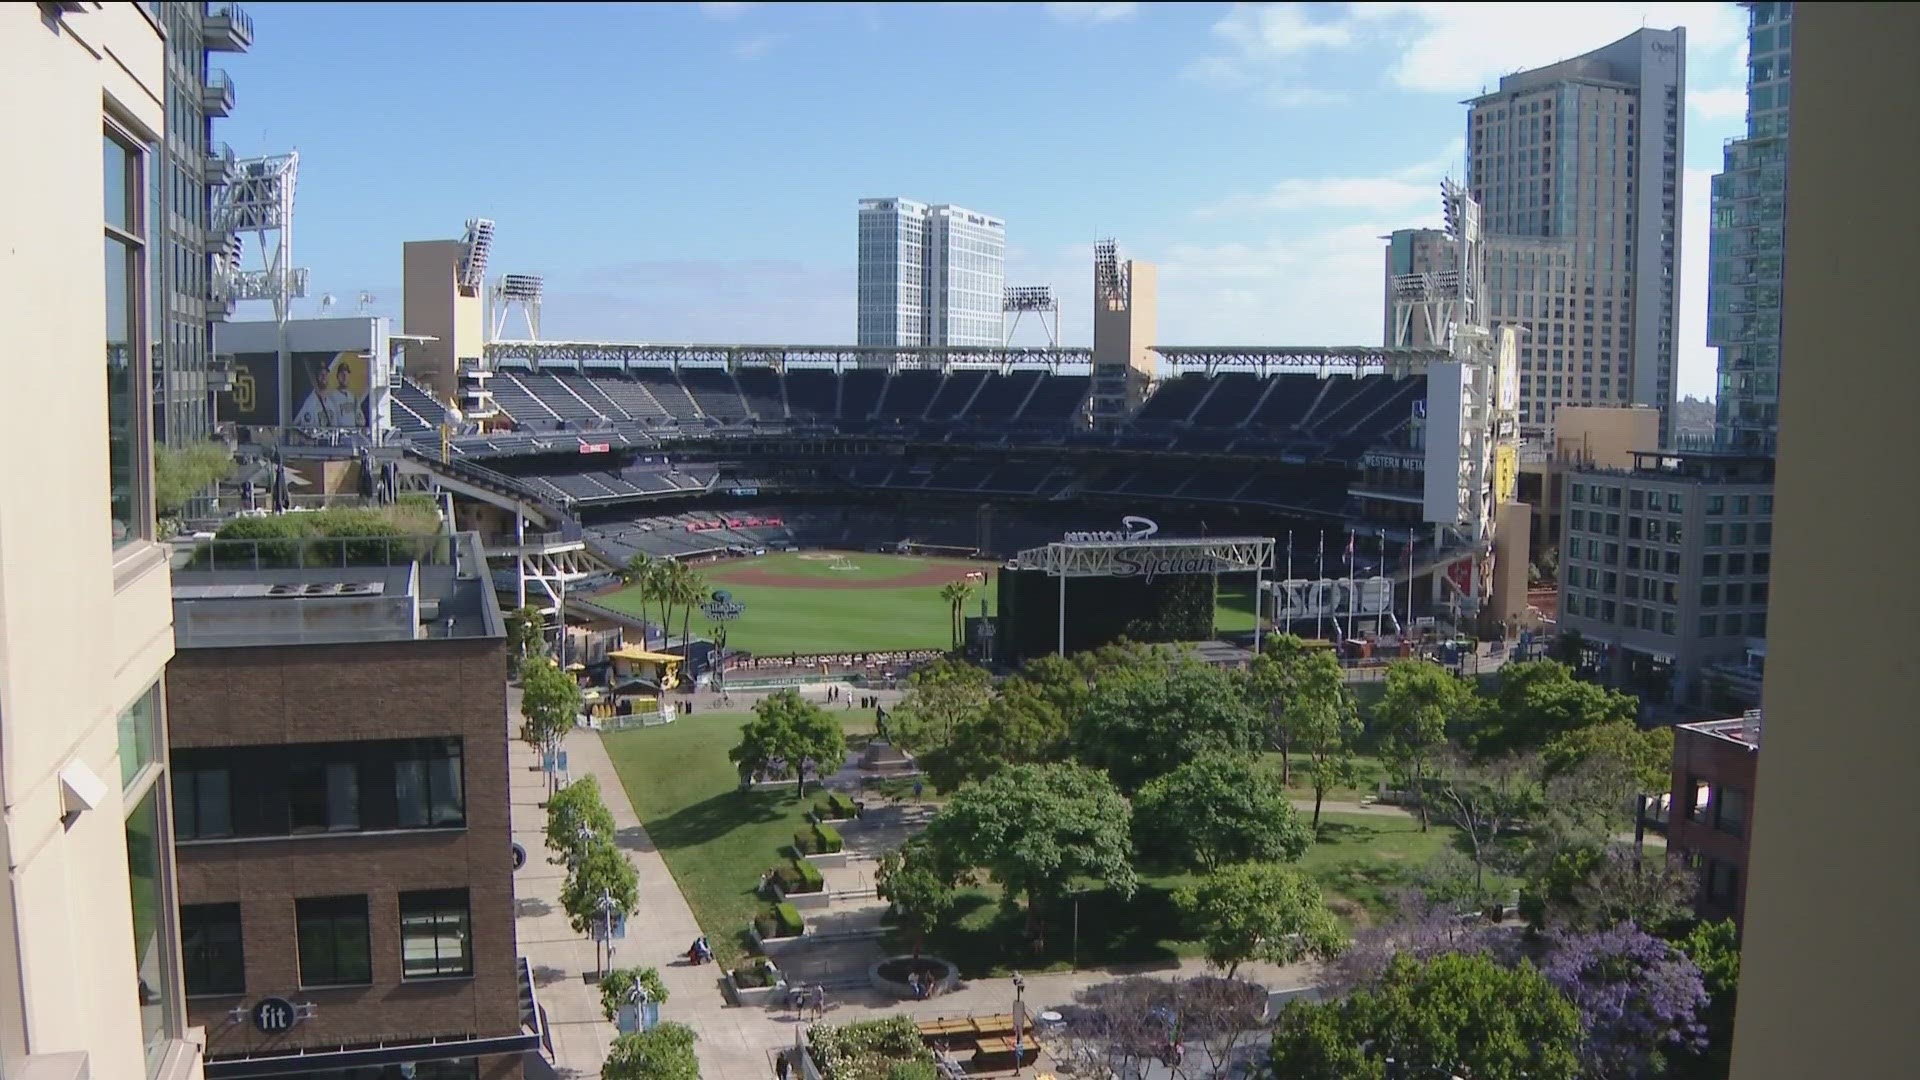 Neighbors say the noise during some concerts have been "devastating" to their lives. The Padres contend they are "in full compliance with noise regulations."